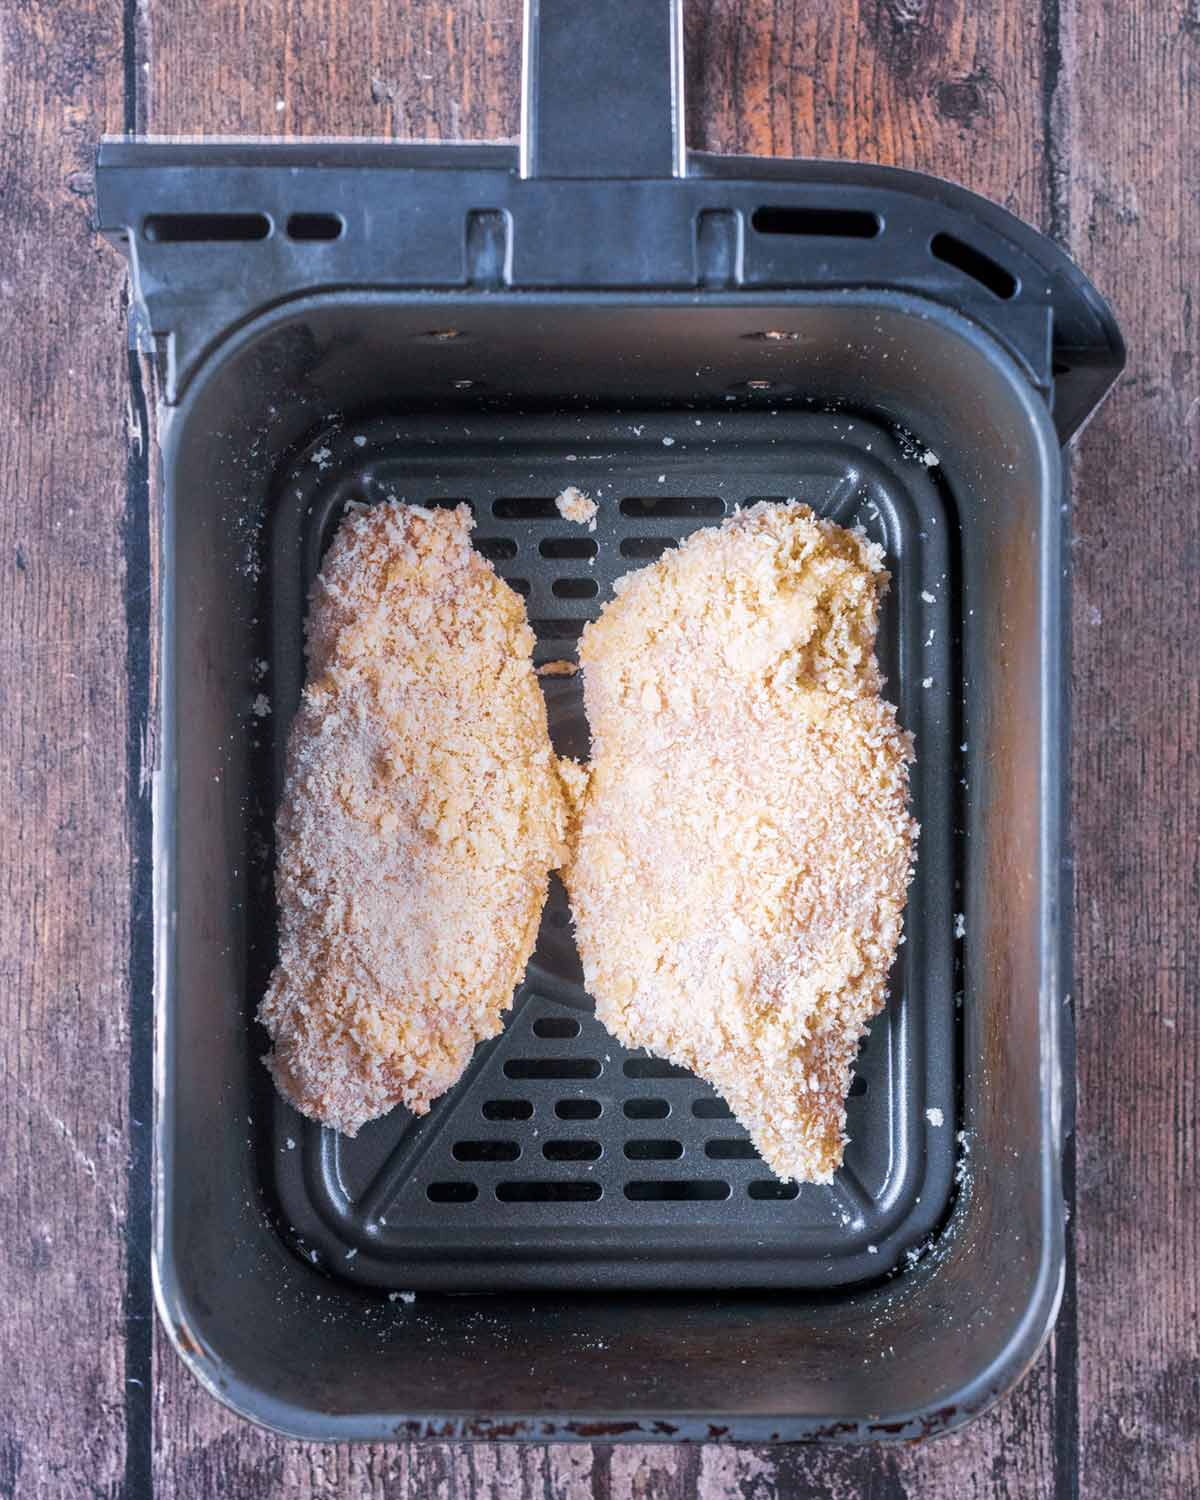 Coated chicken breasts in an air fryer basket.